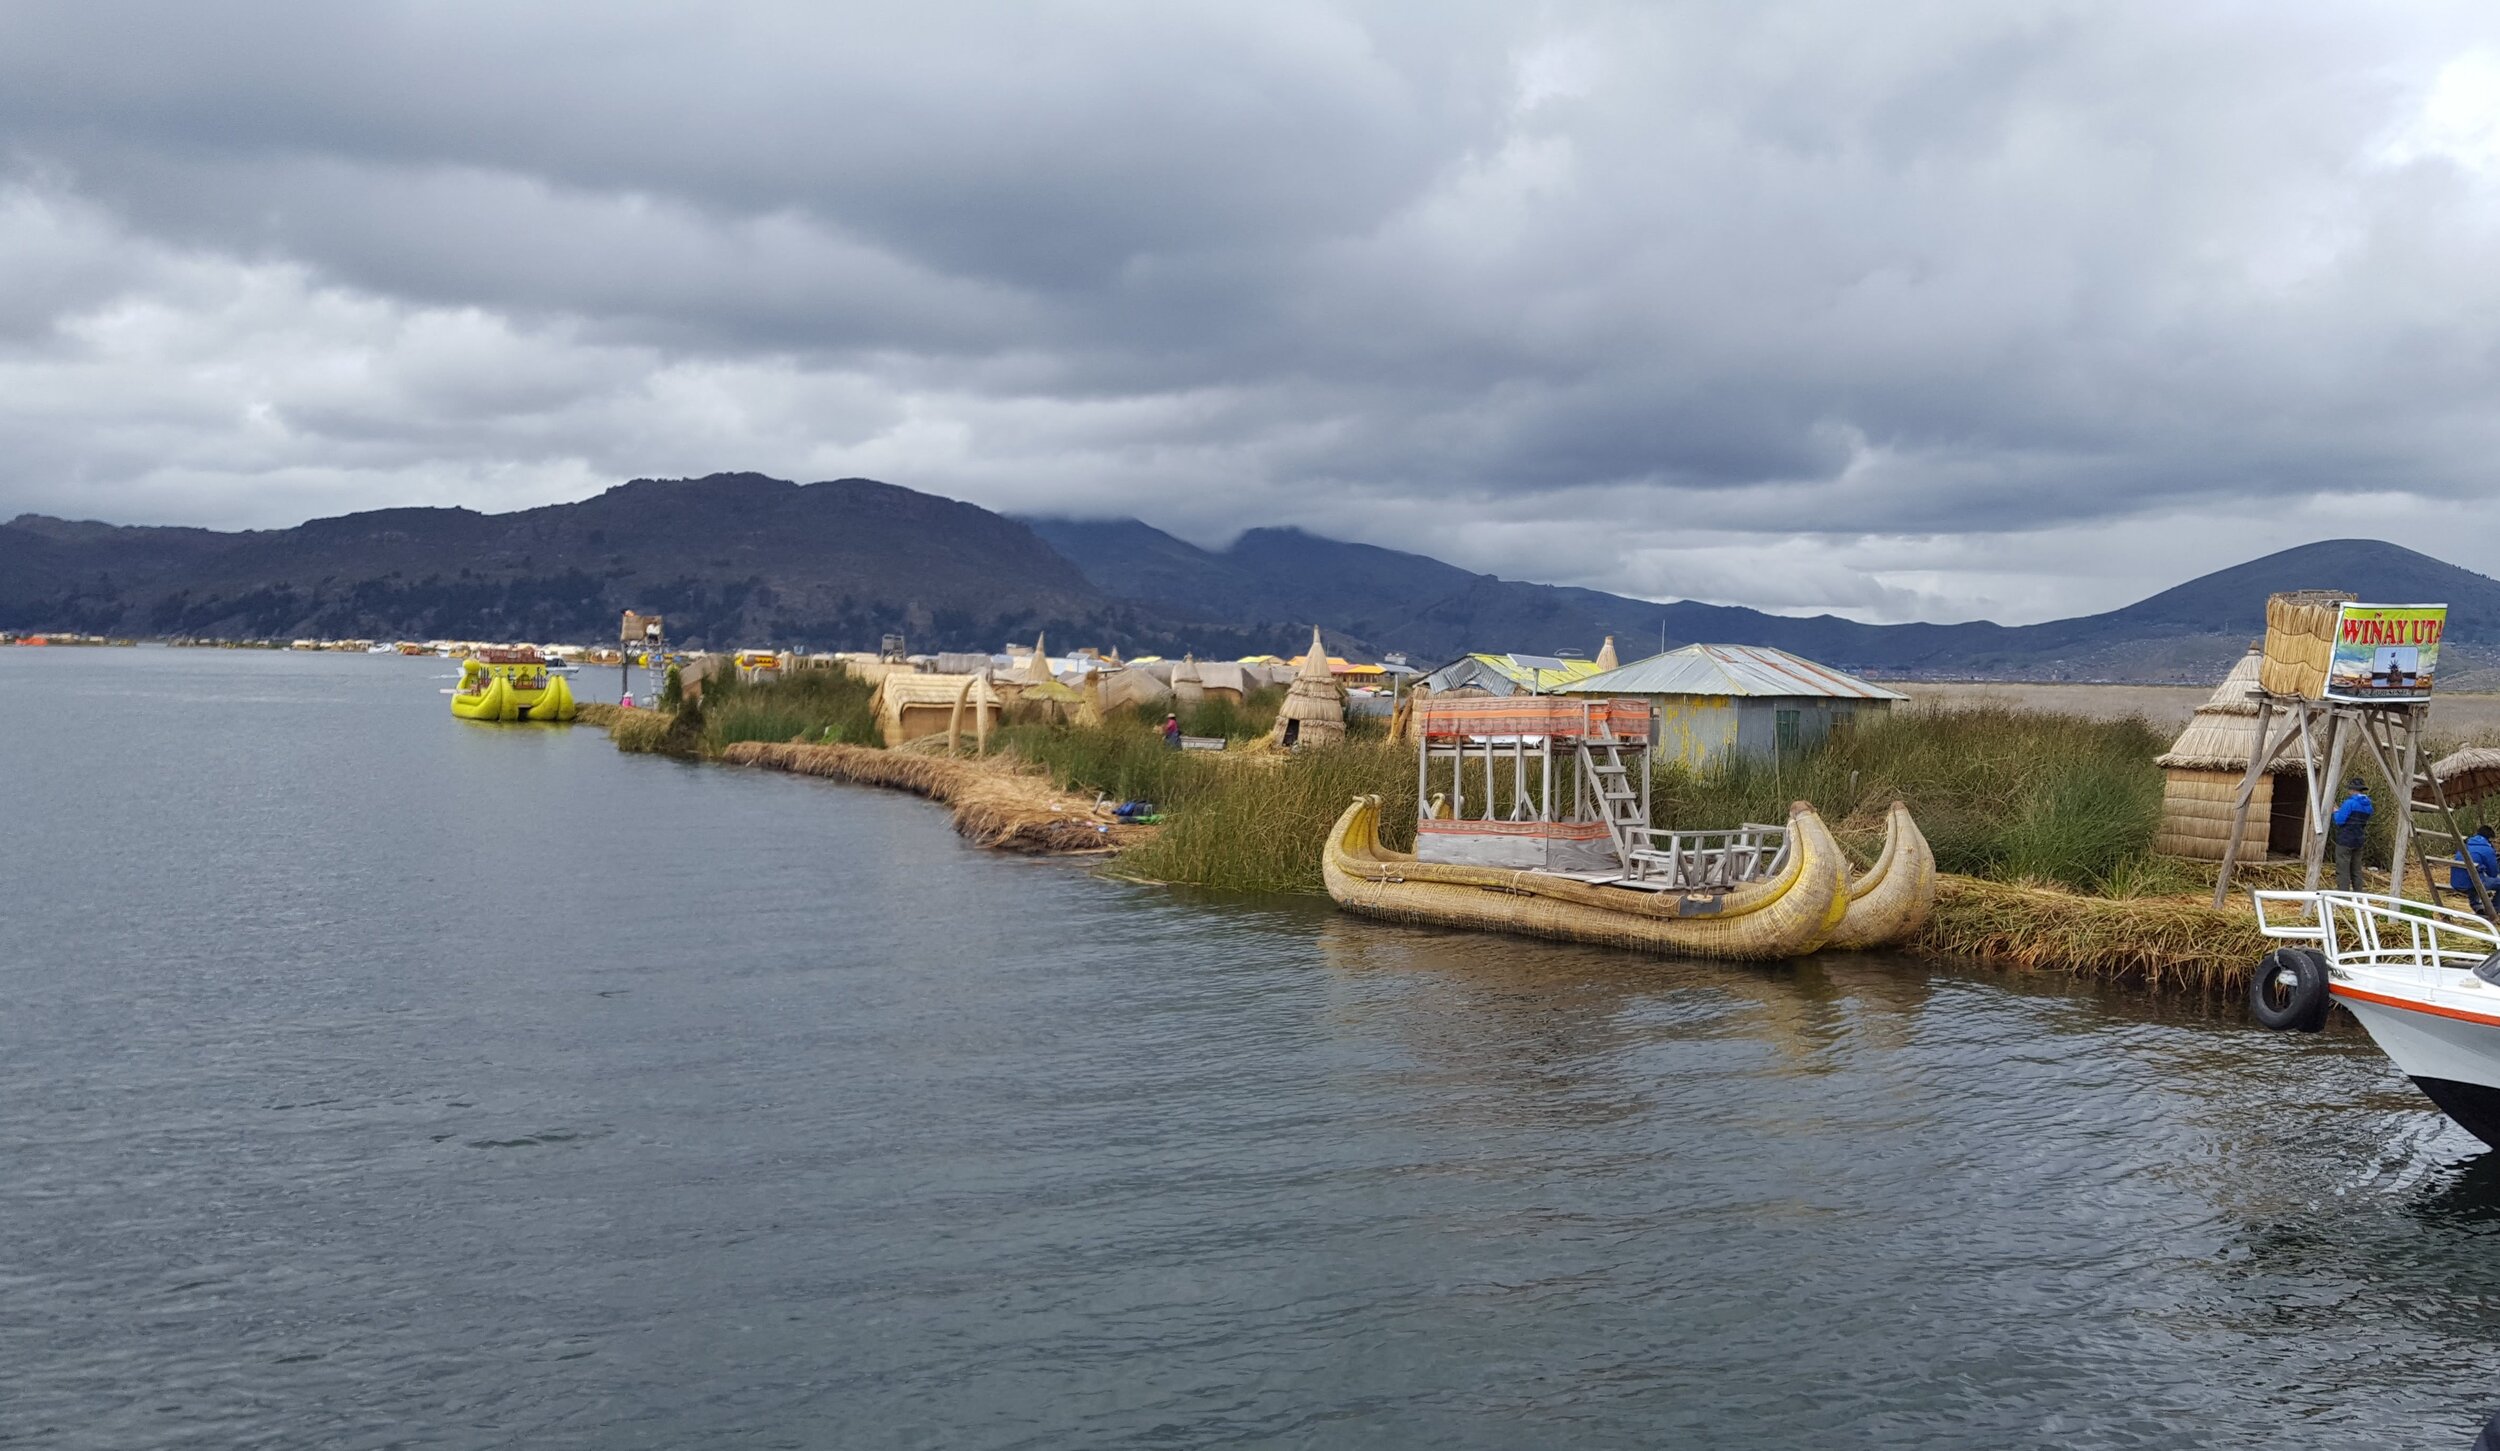 The Floating Islands of Uros